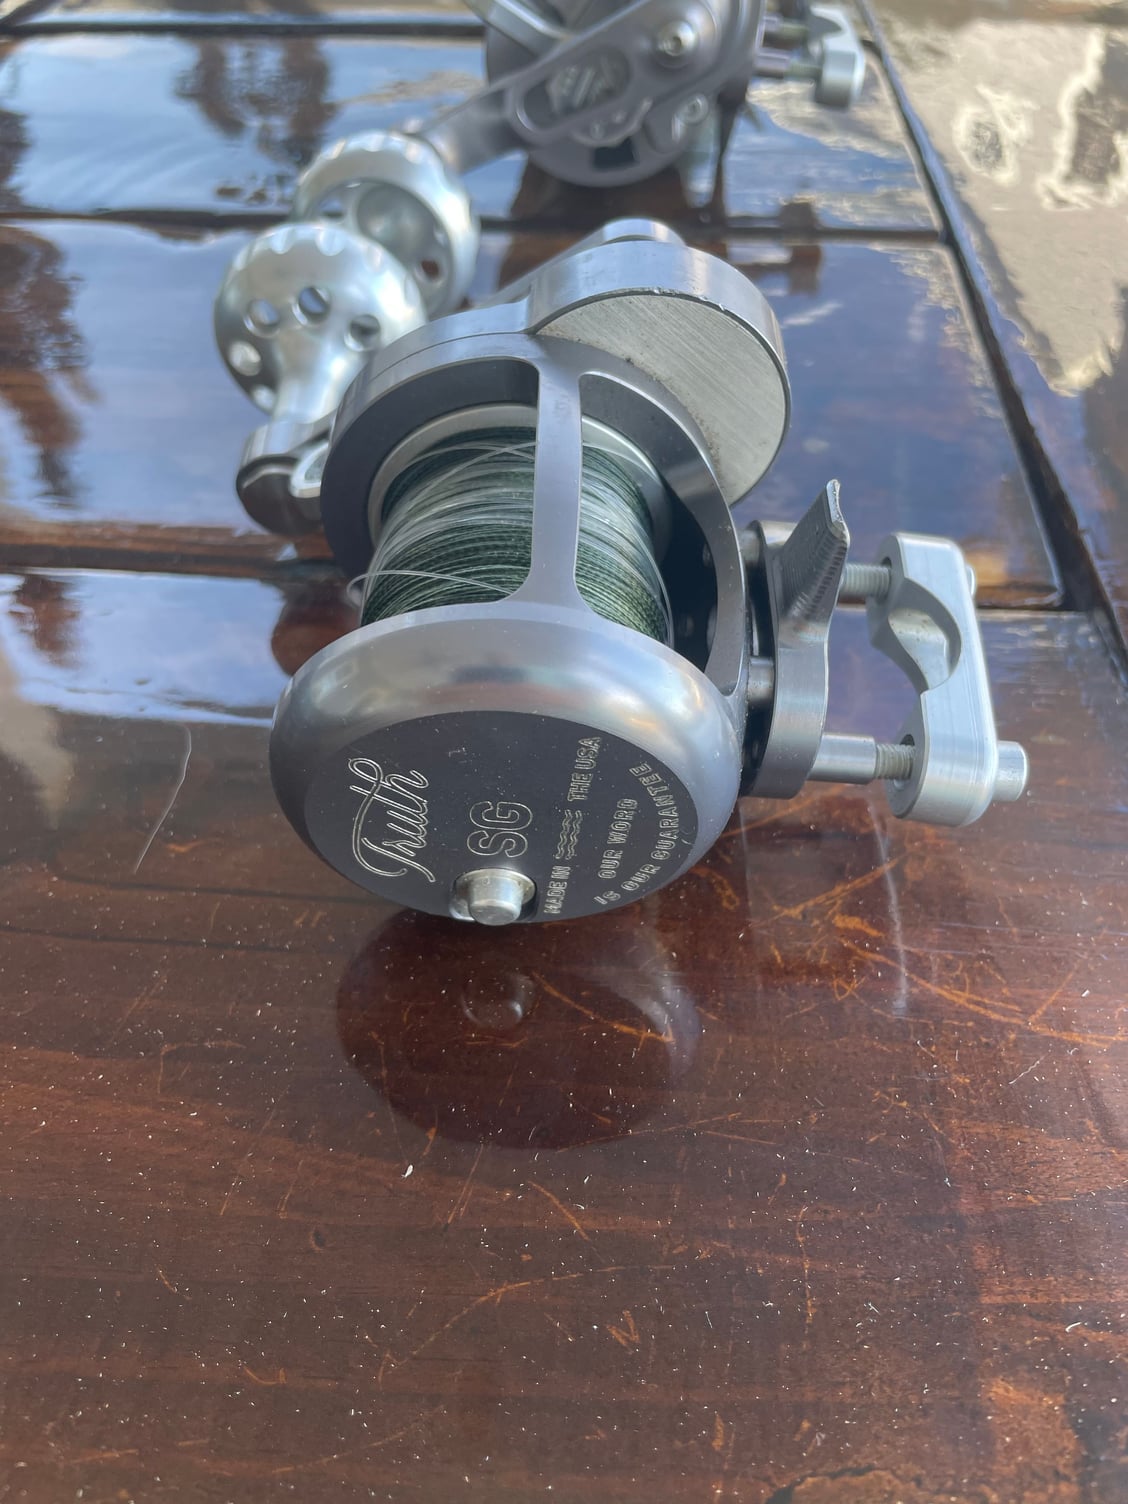 Seigler/Truth reels For Sale - The Hull Truth - Boating and